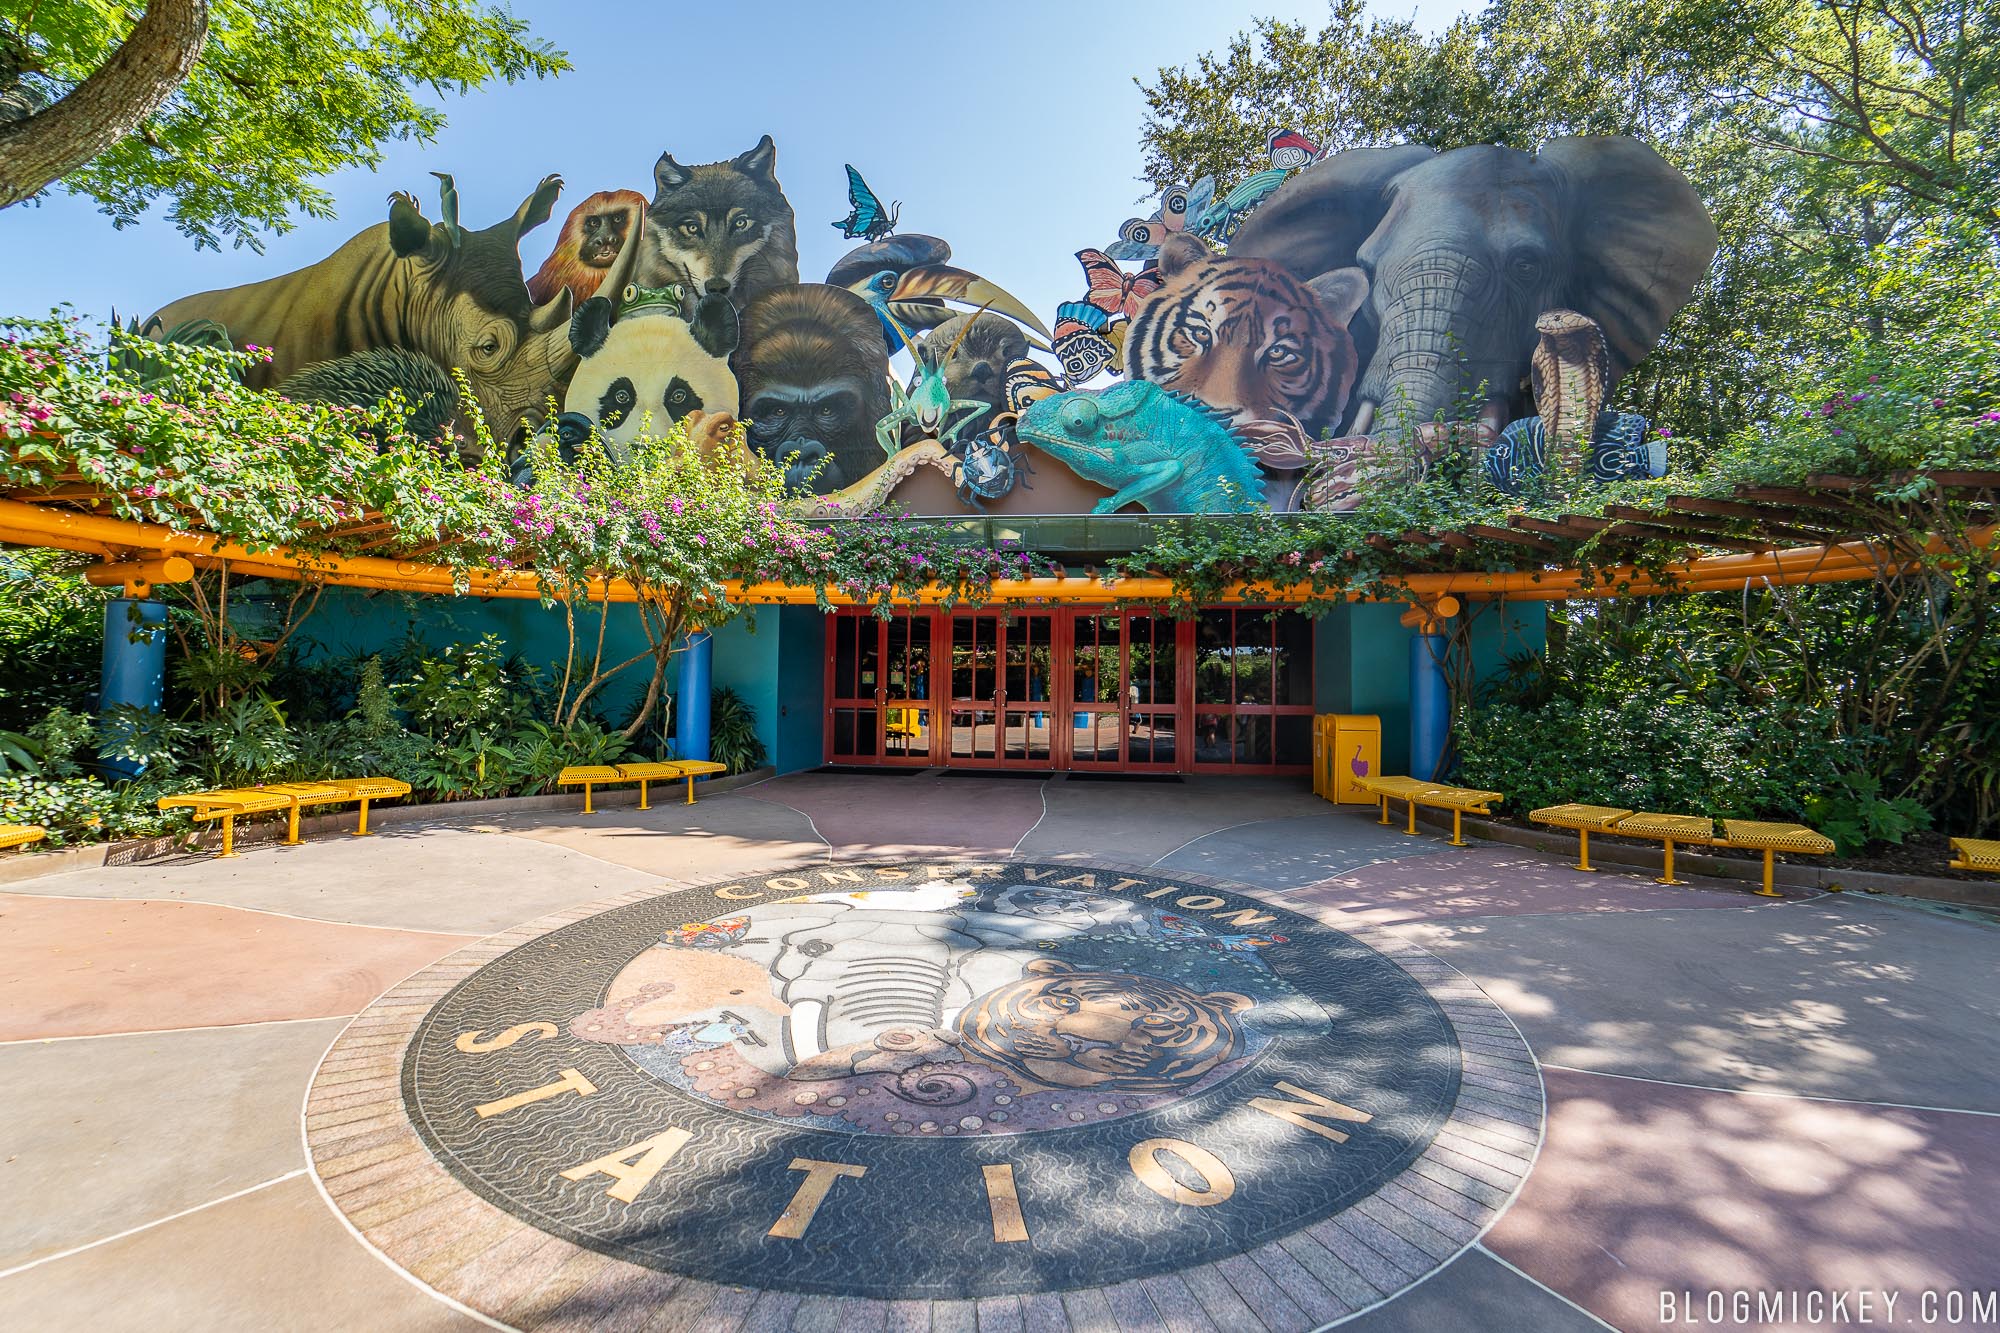 BREAKING: Rafiki's Planet Watch to Close Permanently Next Month